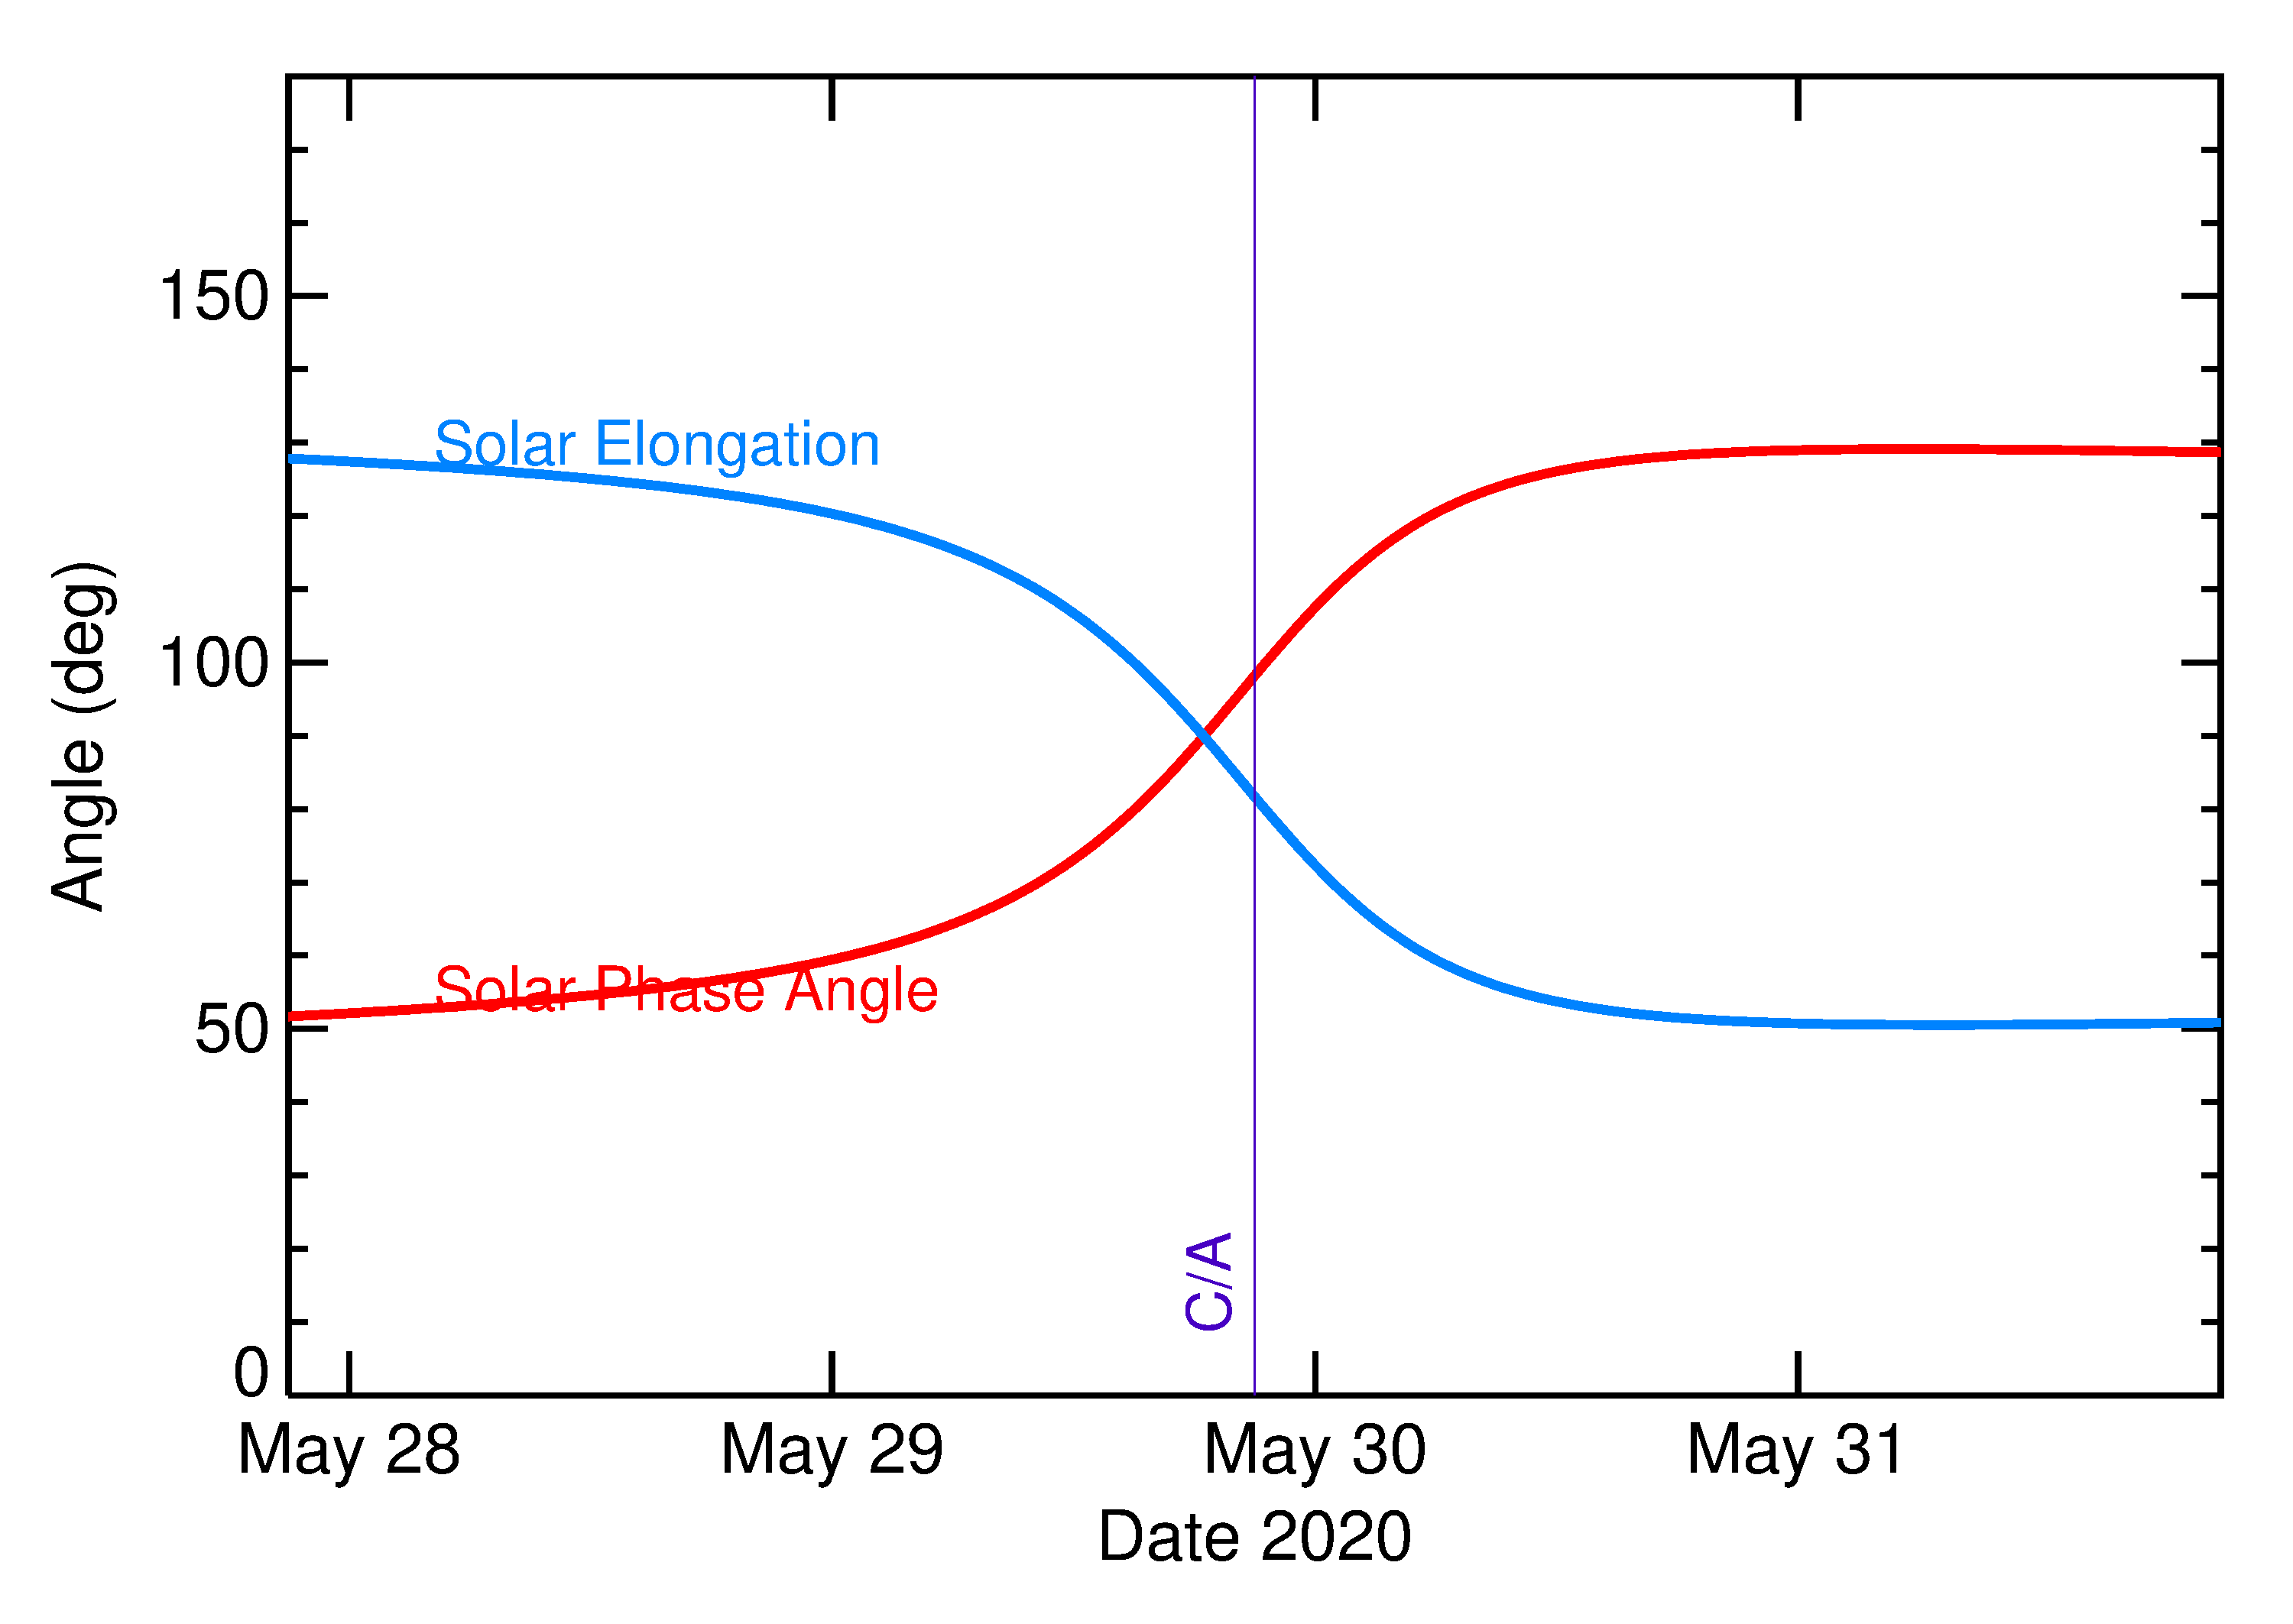 Solar Elongation and Solar Phase Angle of 2020 KC5 in the days around closest approach